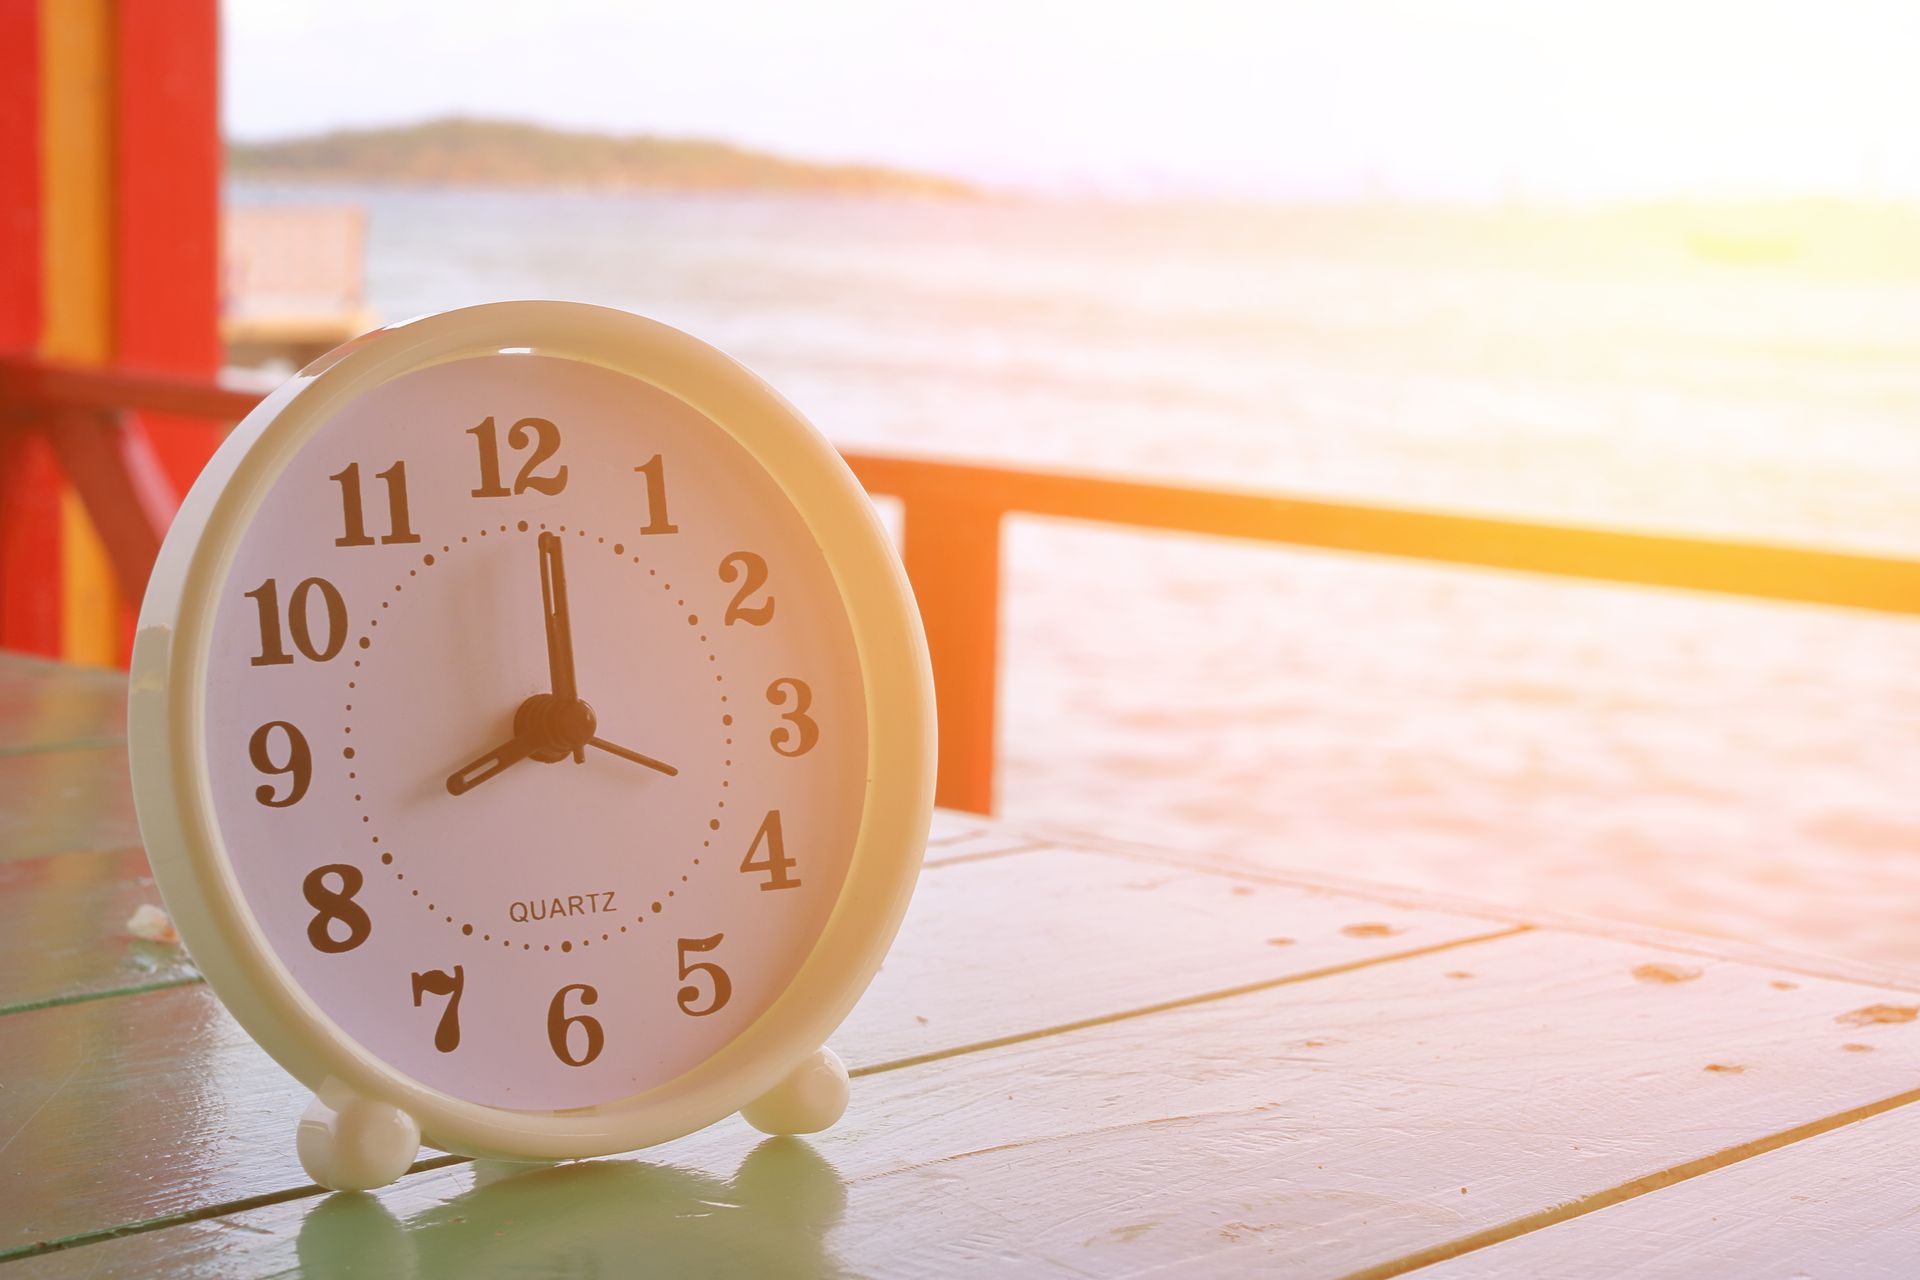 image of an analog desk clock showing 8AM on a wooden table by the beach.